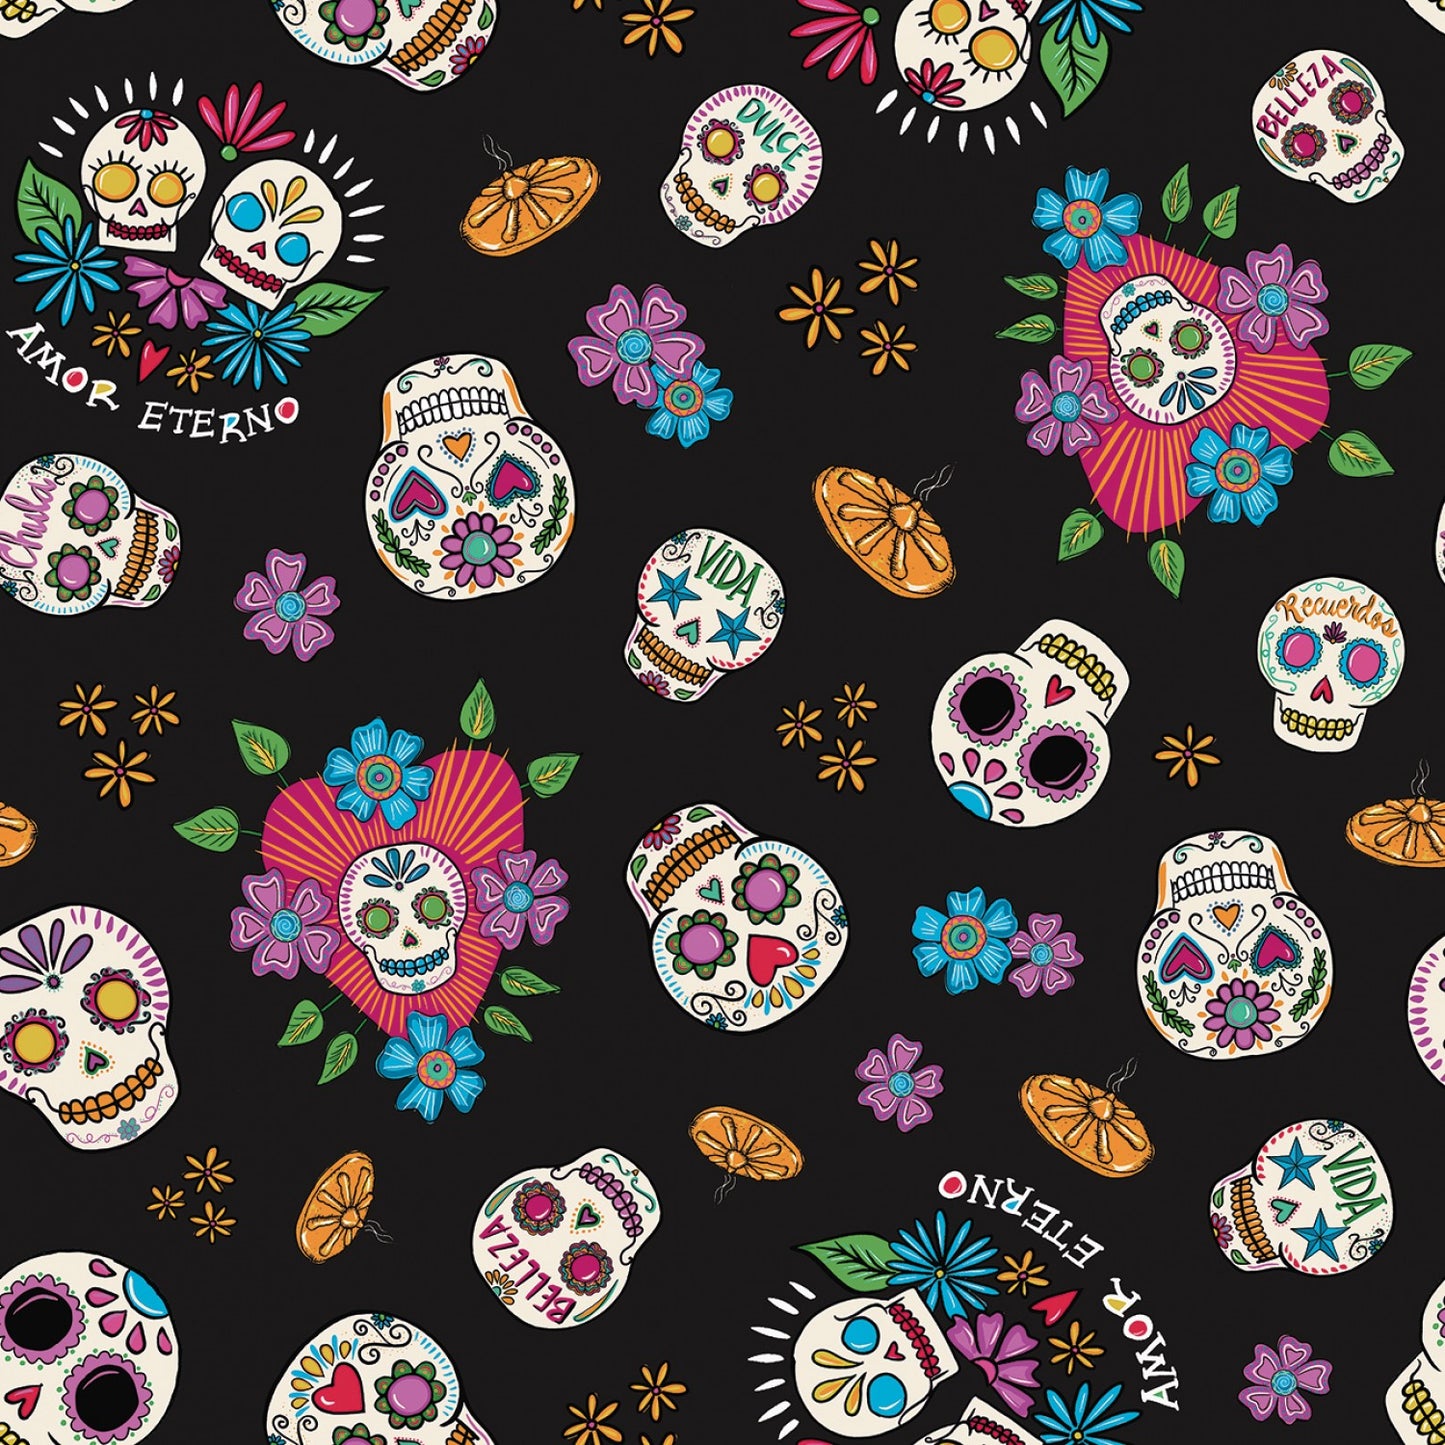 Amor Eterno by Crafty Chica Skulls Black    C11811R-BLACK Cotton Woven Fabric